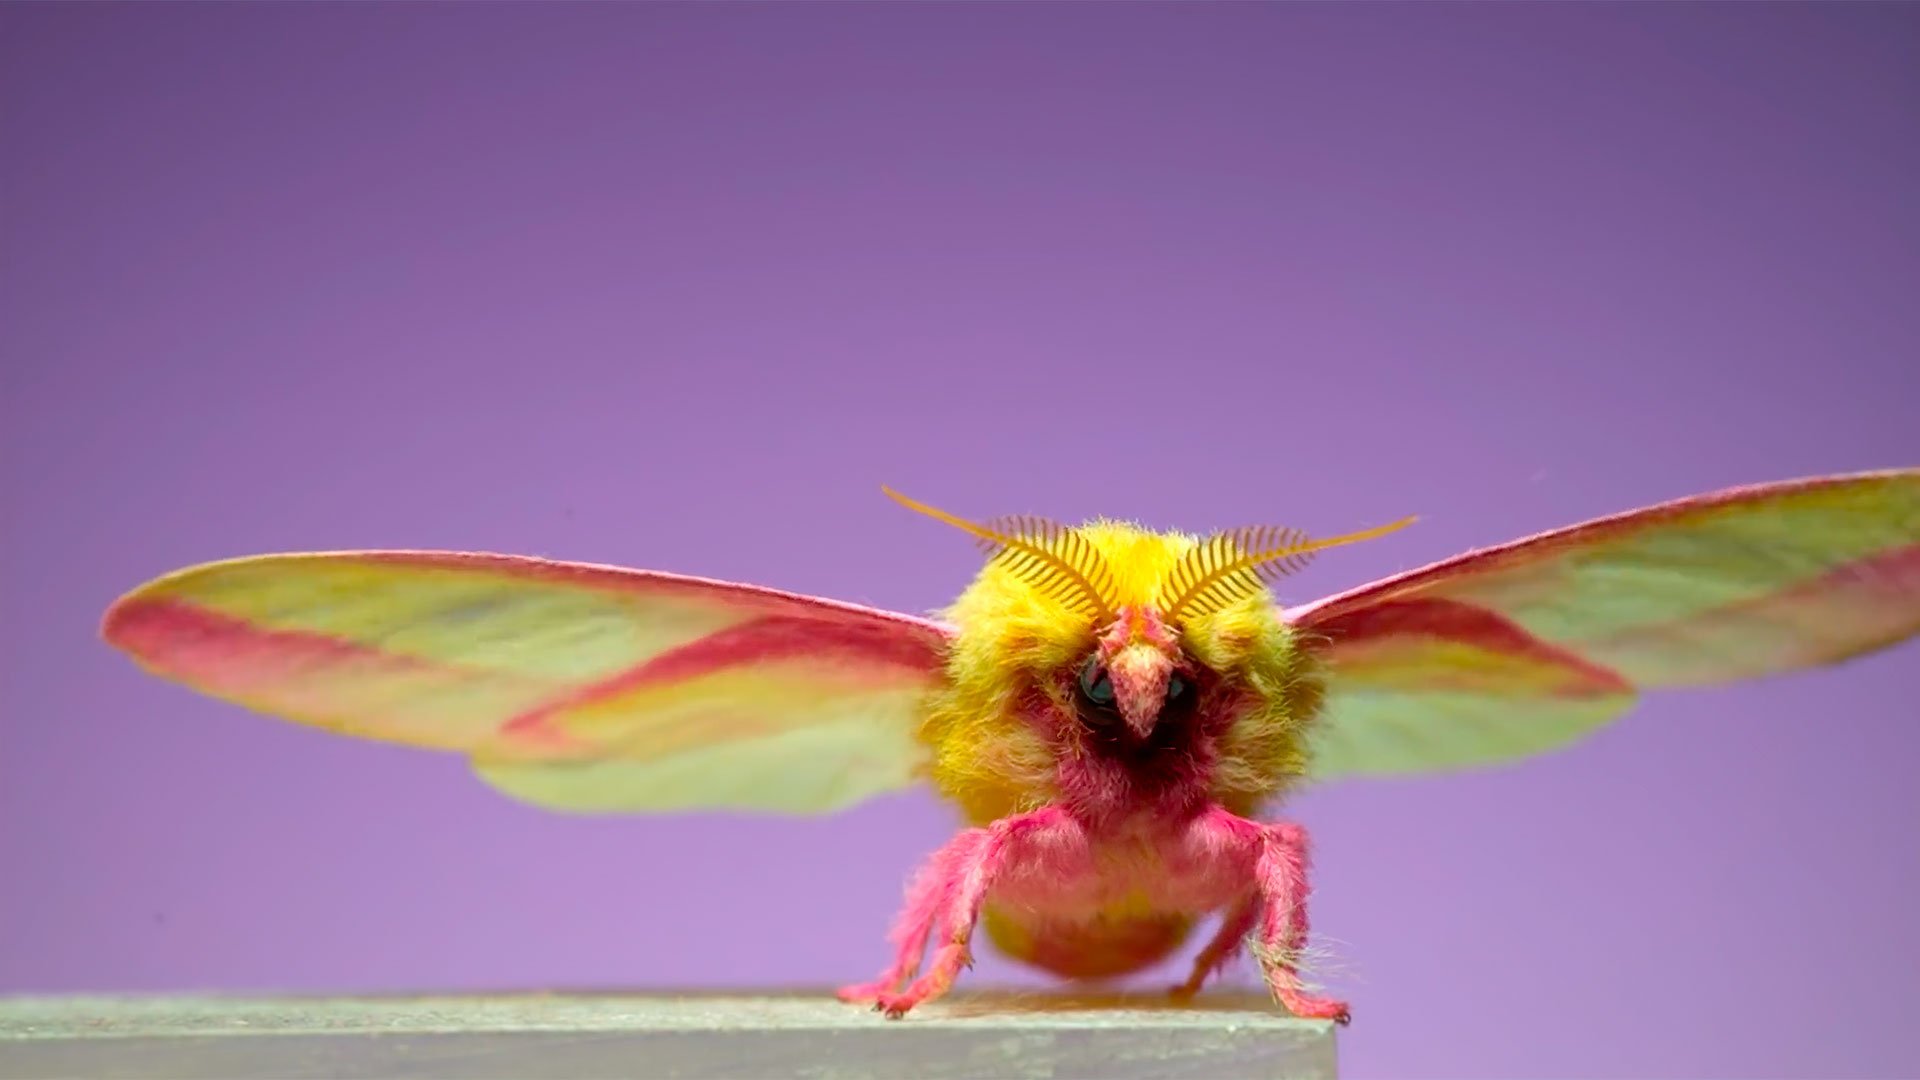 Moths at 6,000 fps. Why not?